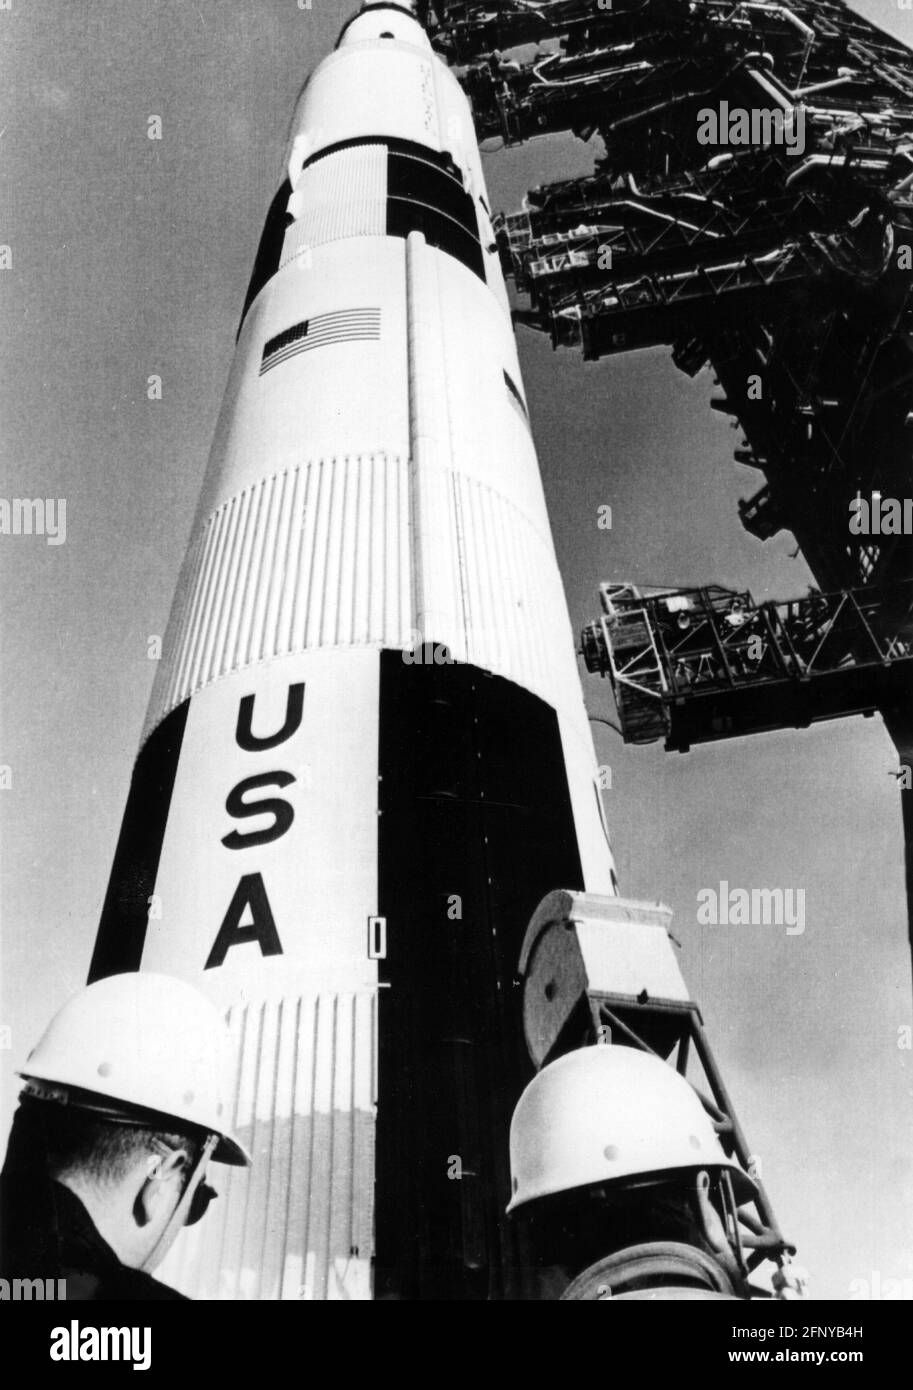 astronautica, Missions, USA, Apollo 13, booster Rocket Saturn V, Cape Kennedy, anni 60, ADDITIONAL-RIGHTS-CLEARANCE-INFO-NOT-AVAILABLE Foto Stock